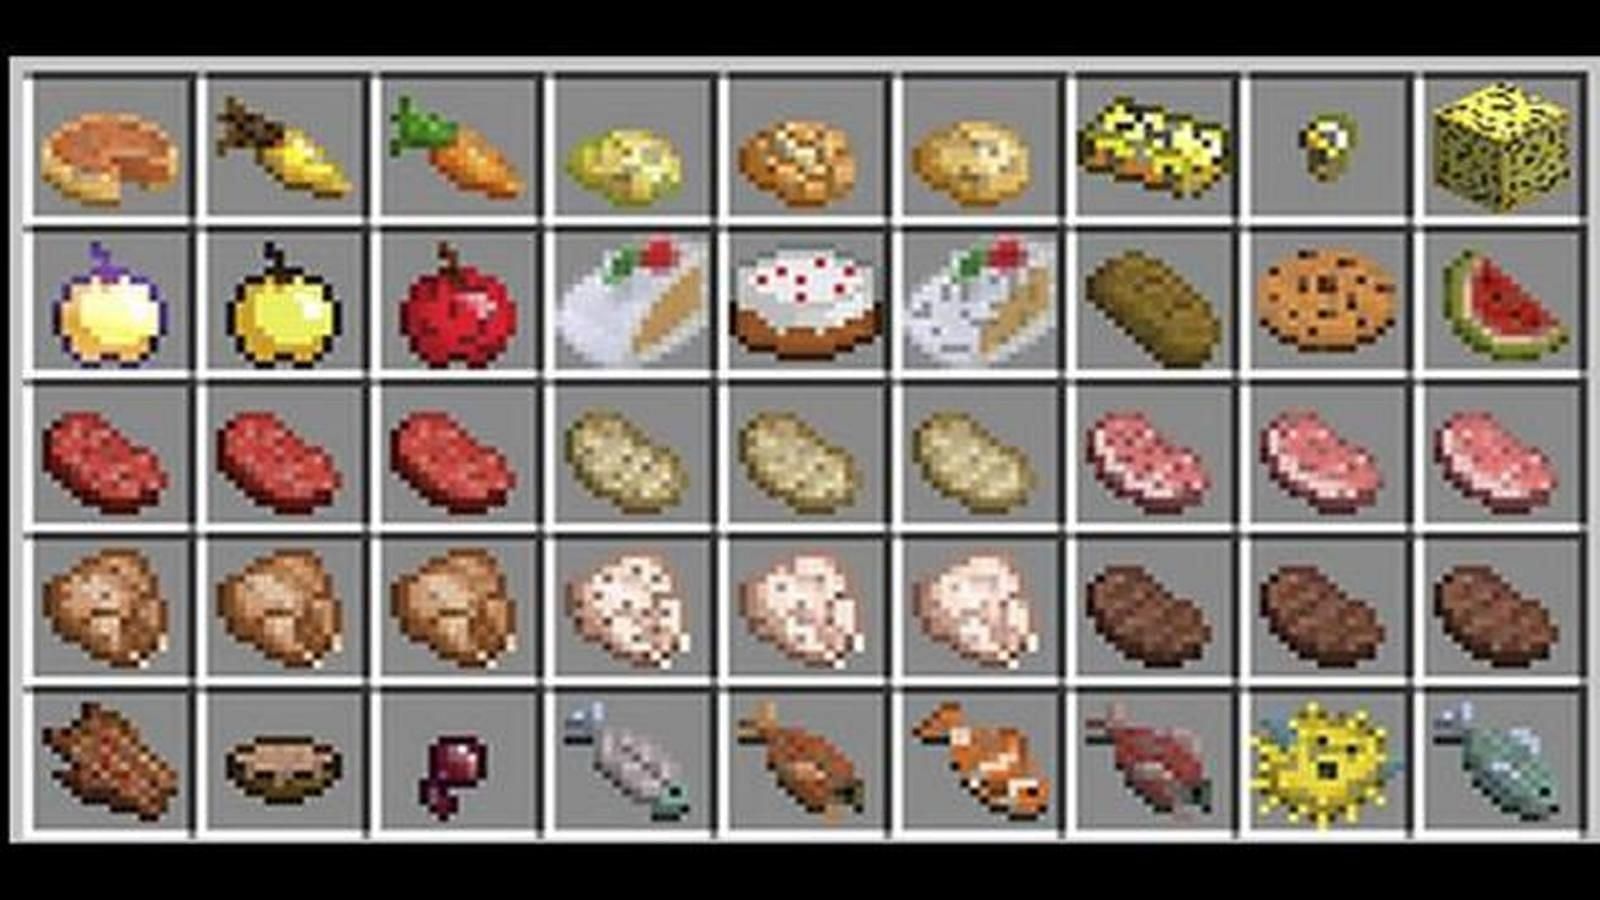 Different types of food items can be found in Minecraft (Image via Minecraft)